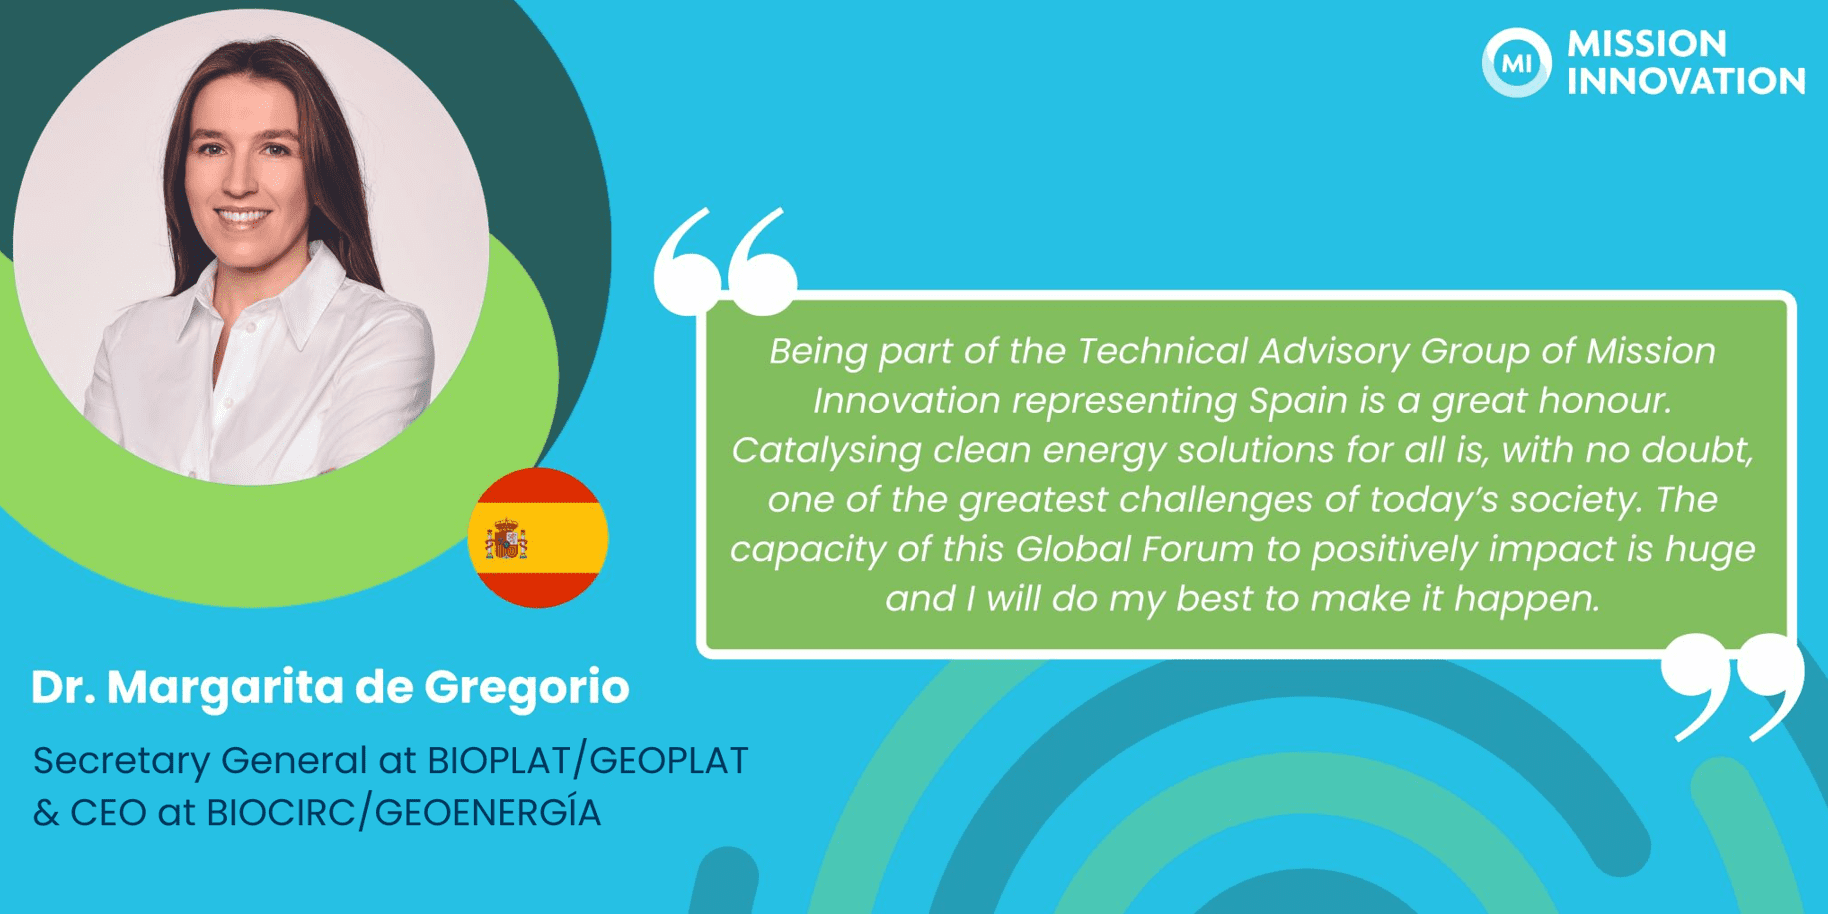 Margarita de Gregorio is elected representative of Spain in the Technical Advisory Group of Mission Innovation